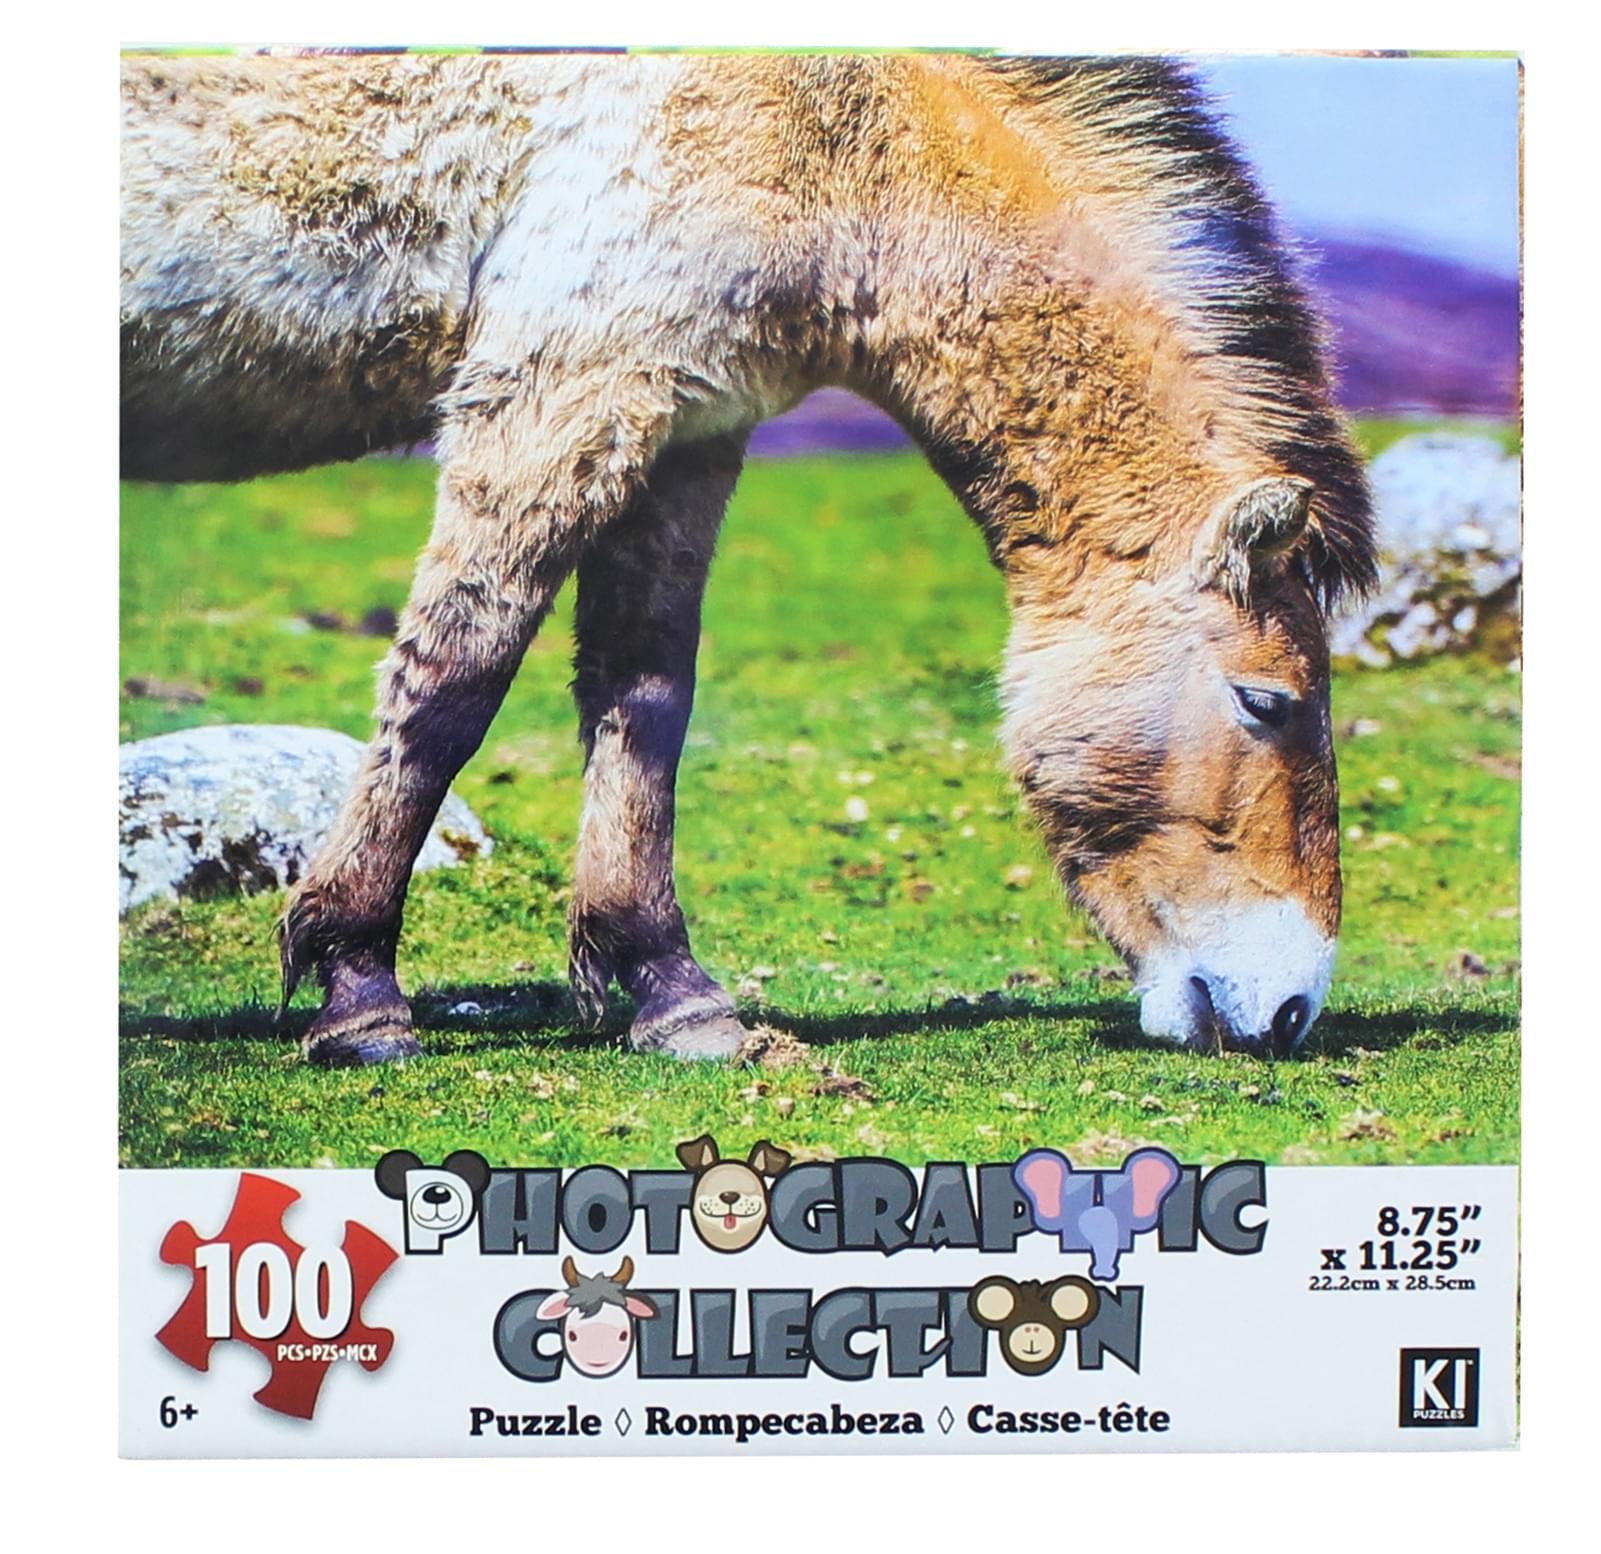 Donkey 100 Piece Photographic Collection Jigsaw Puzzle